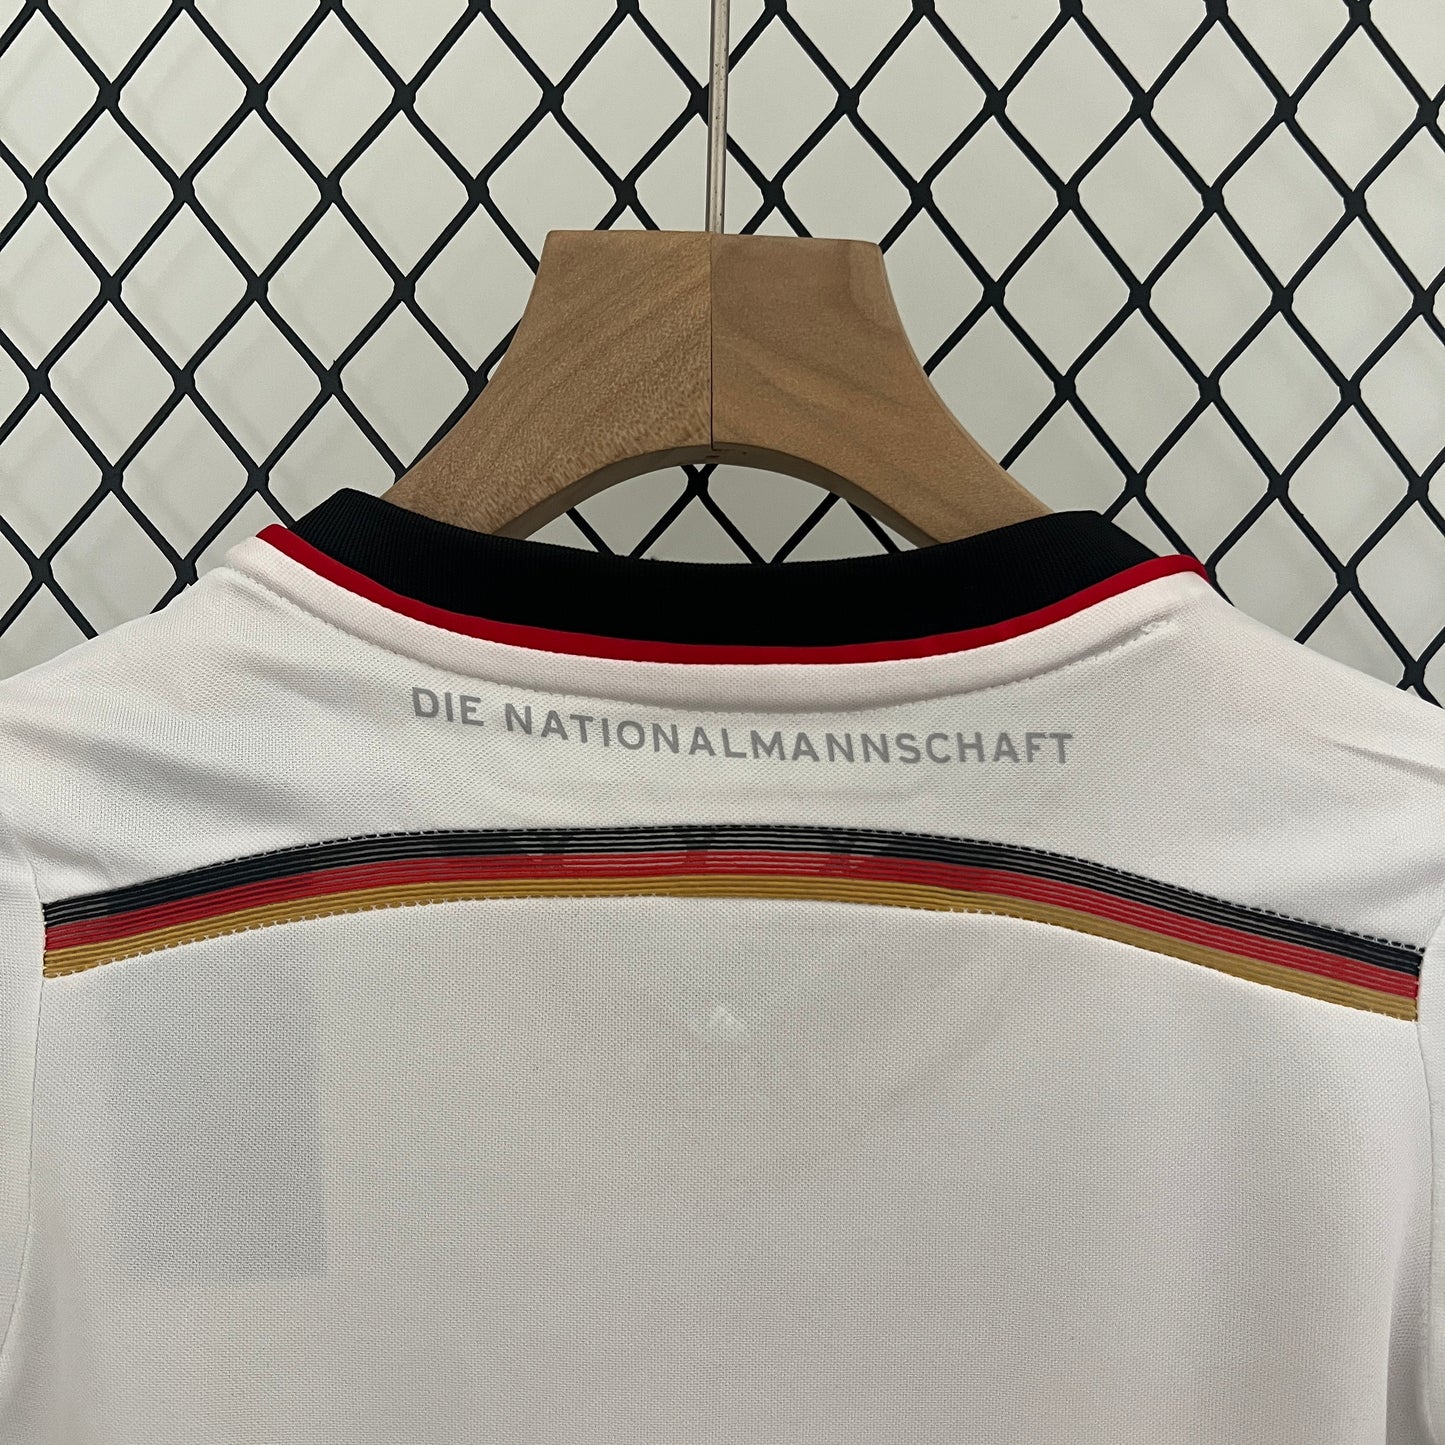 GERMANY 2014 HOME JERSEY FOR CHILDREN